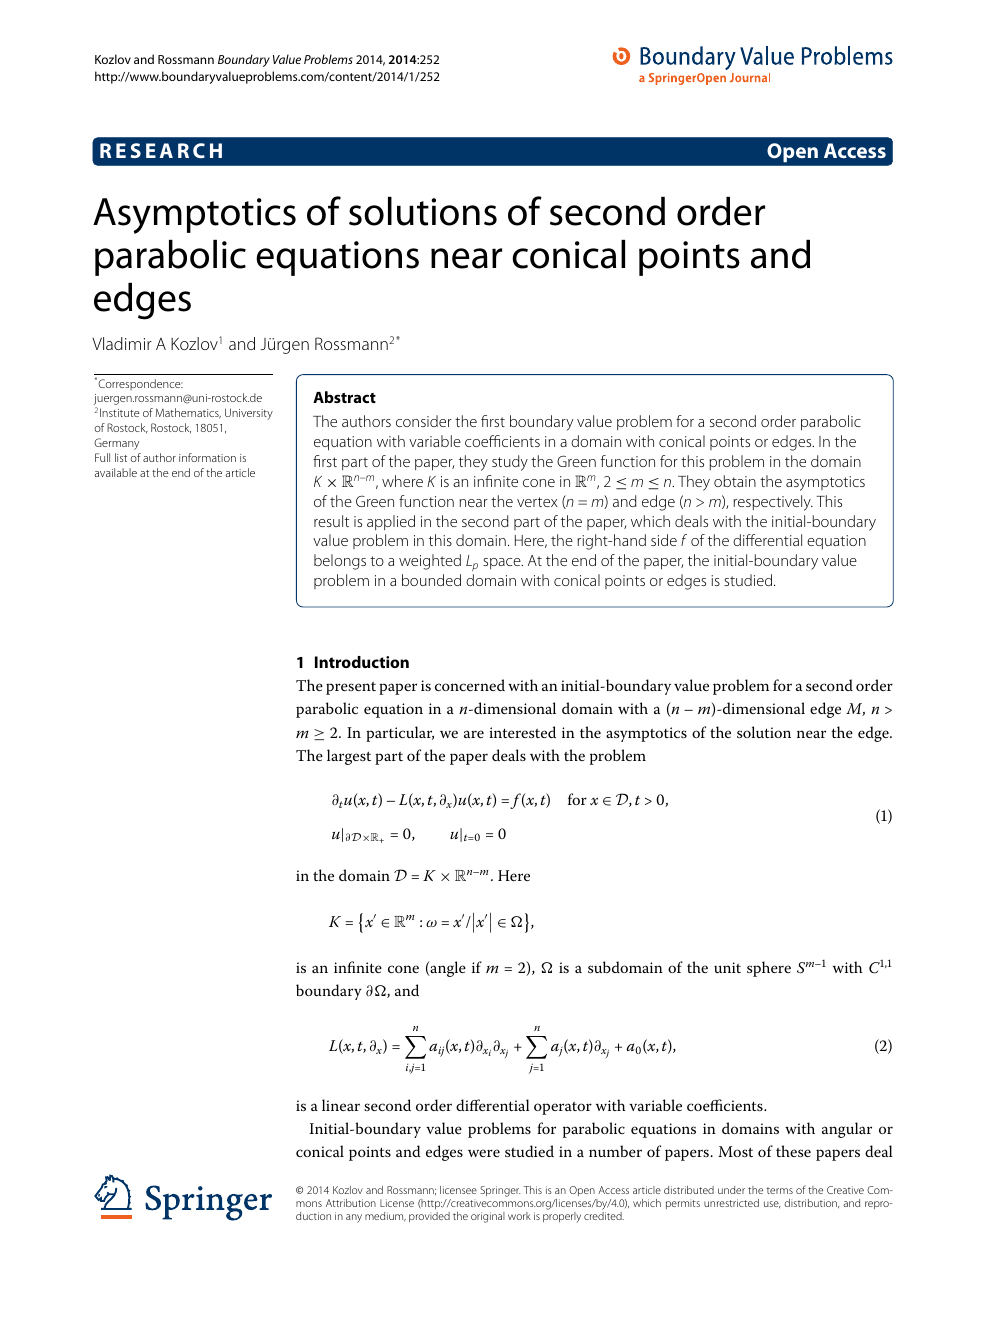 Asymptotics Of Solutions Of Second Order Parabolic Equations Near Conical Points And Edges Topic Of Research Paper In Mathematics Download Scholarly Article Pdf And Read For Free On Cyberleninka Open Science